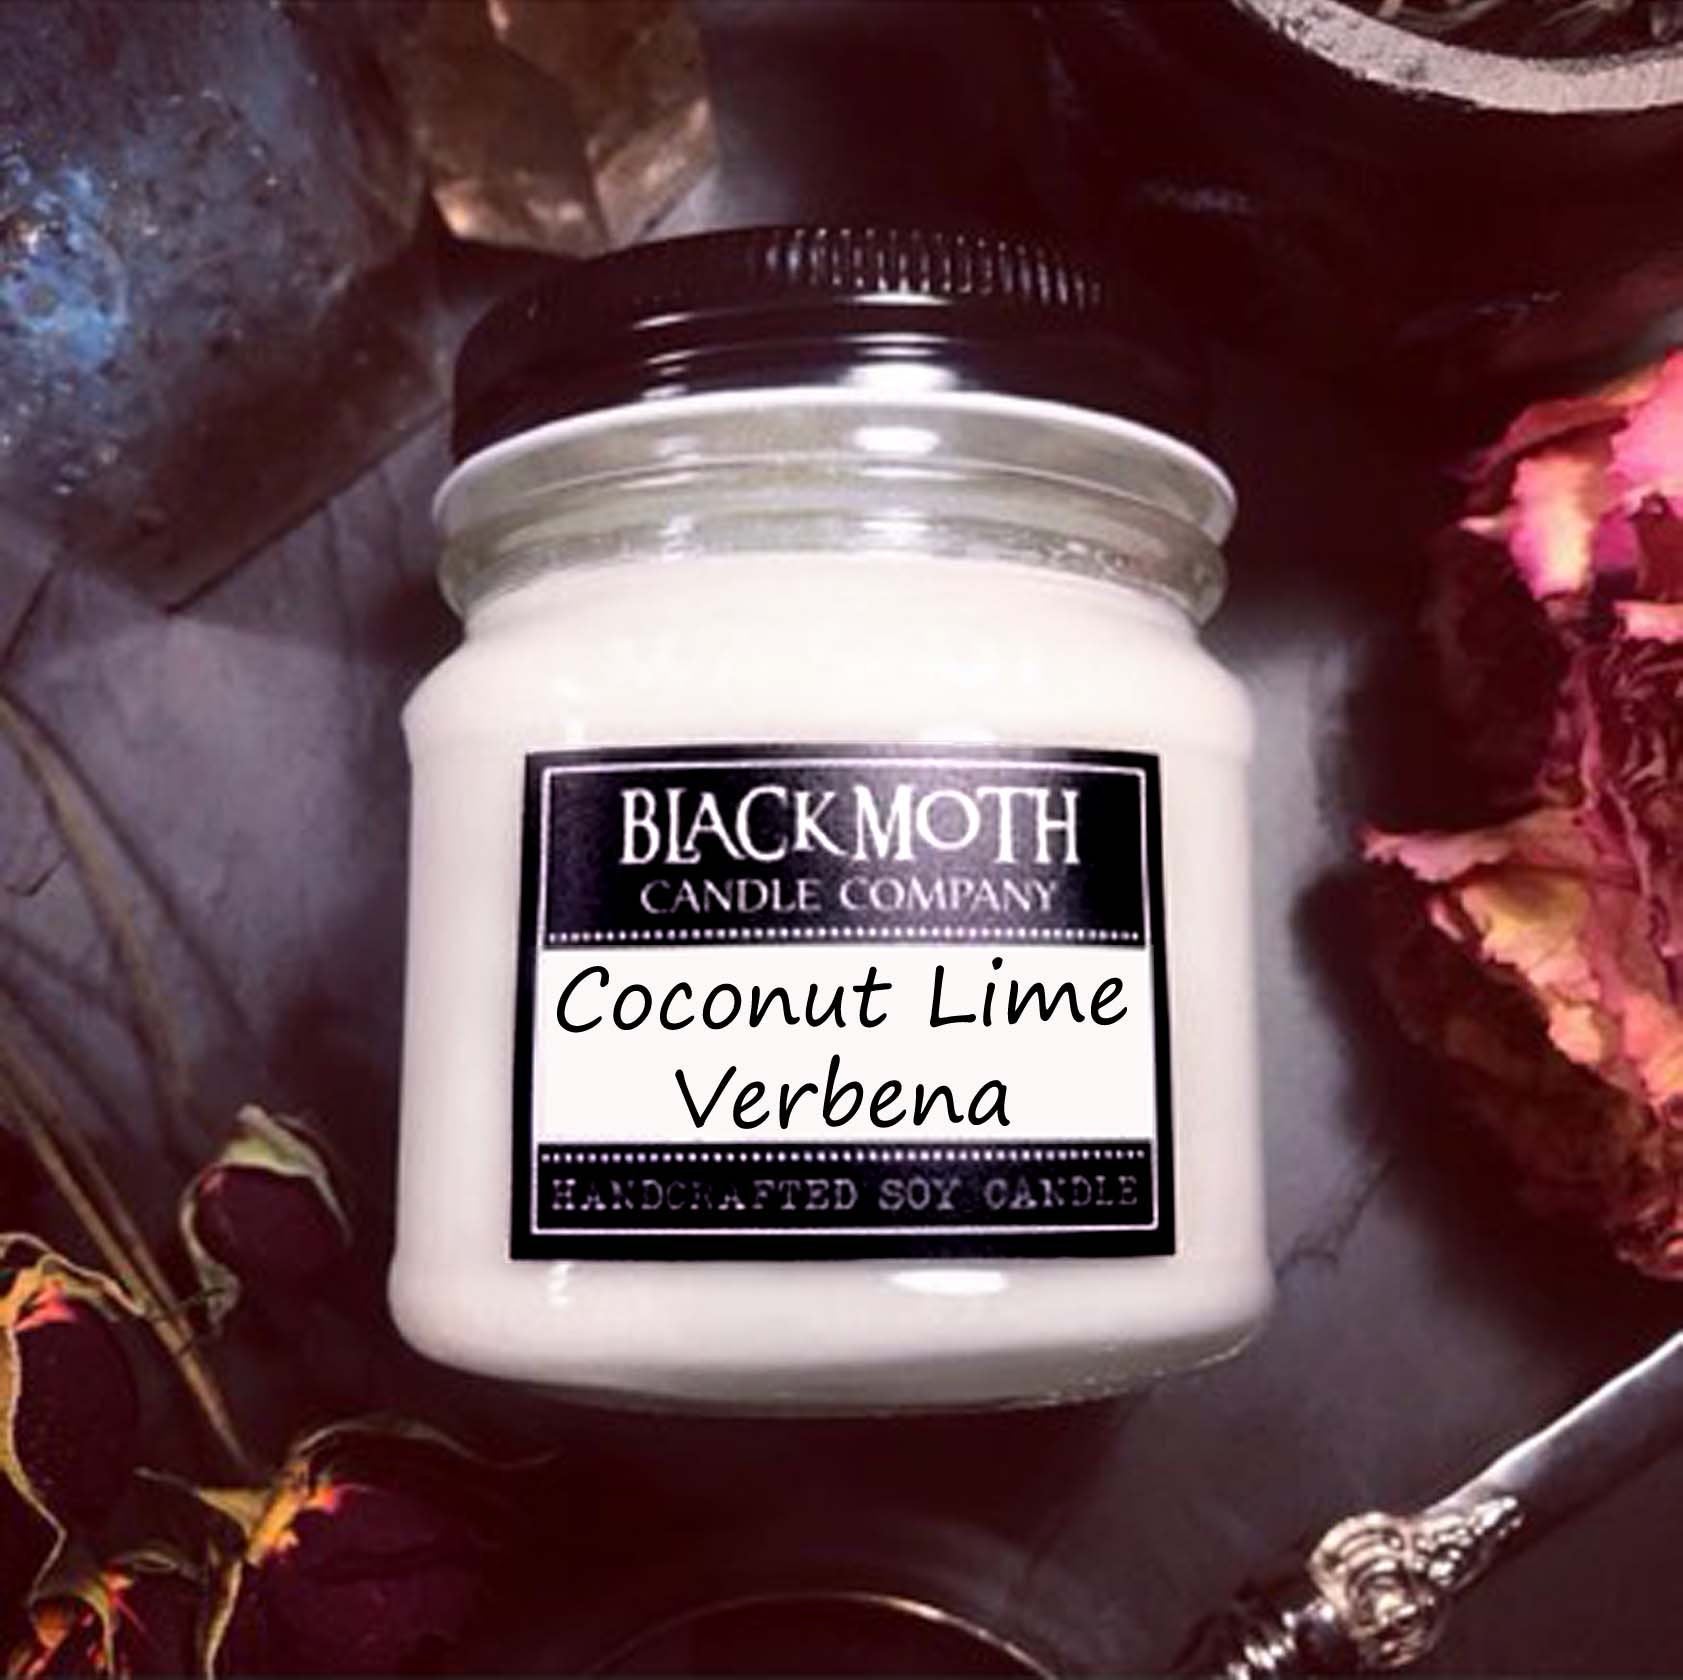 8 oz Coconut Lime Verbena Scented Soy Candle in Mason Jar